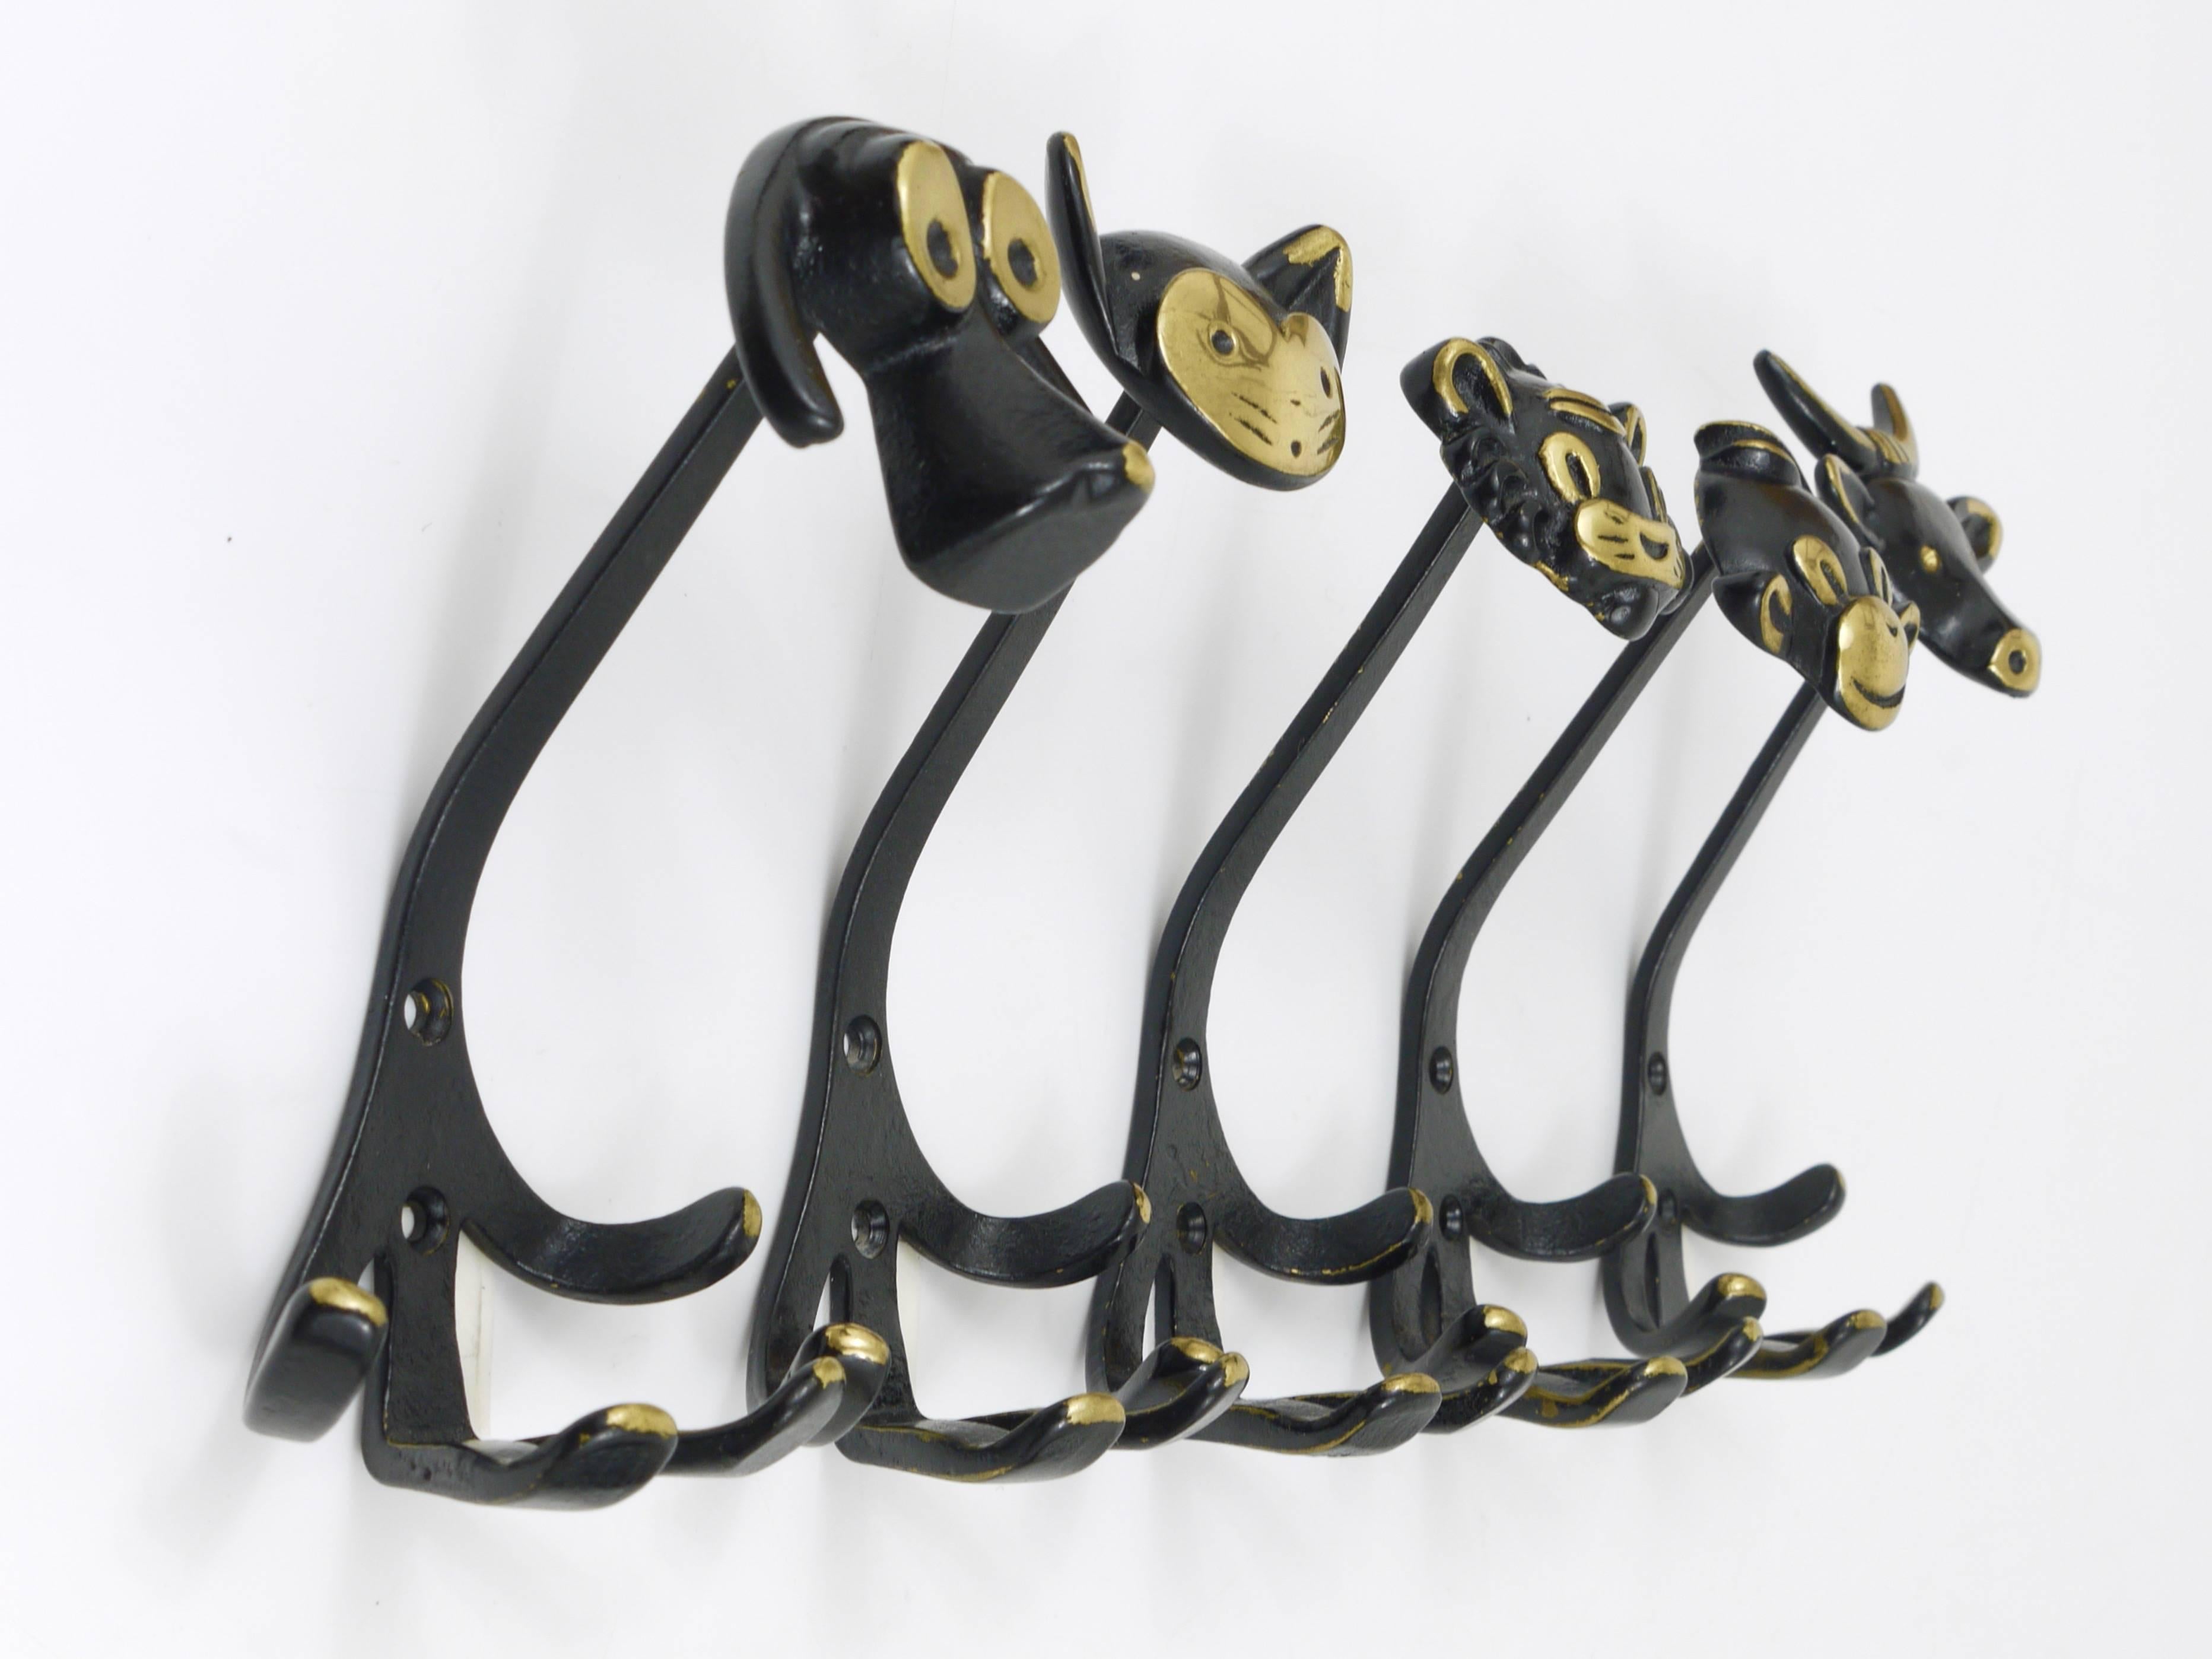 A set of five Austrian modernist brass wall coat hooks, displaying a dog, a cow, a lion, a cat and a monkey. A very humorous design by Walter Bosse, executed by Hertha Baller Austria in the 1950s. Made of black finished brass. In excellent